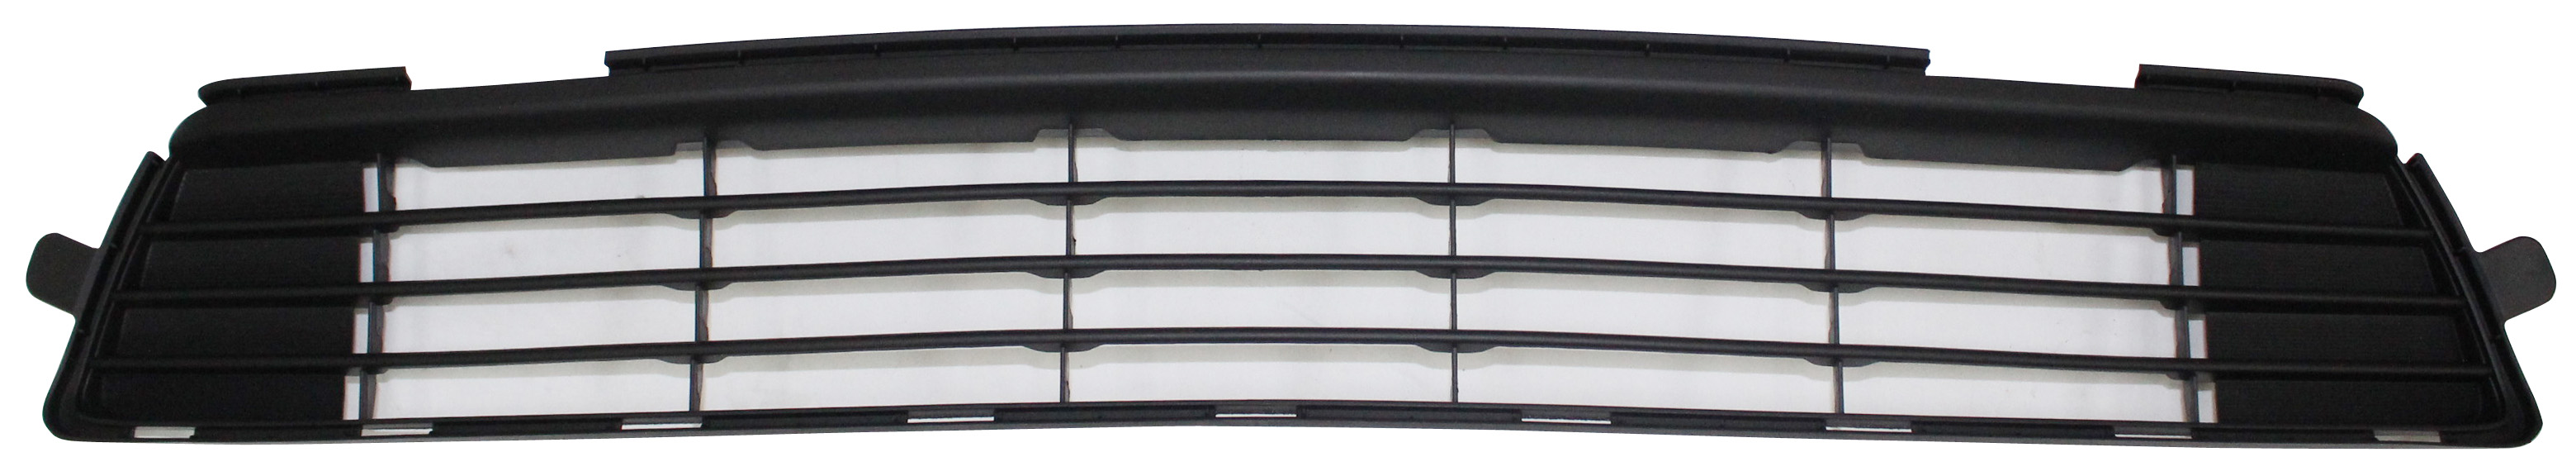 Aftermarket GRILLES for TOYOTA - COROLLA, COROLLA,11-13,Front bumper grille